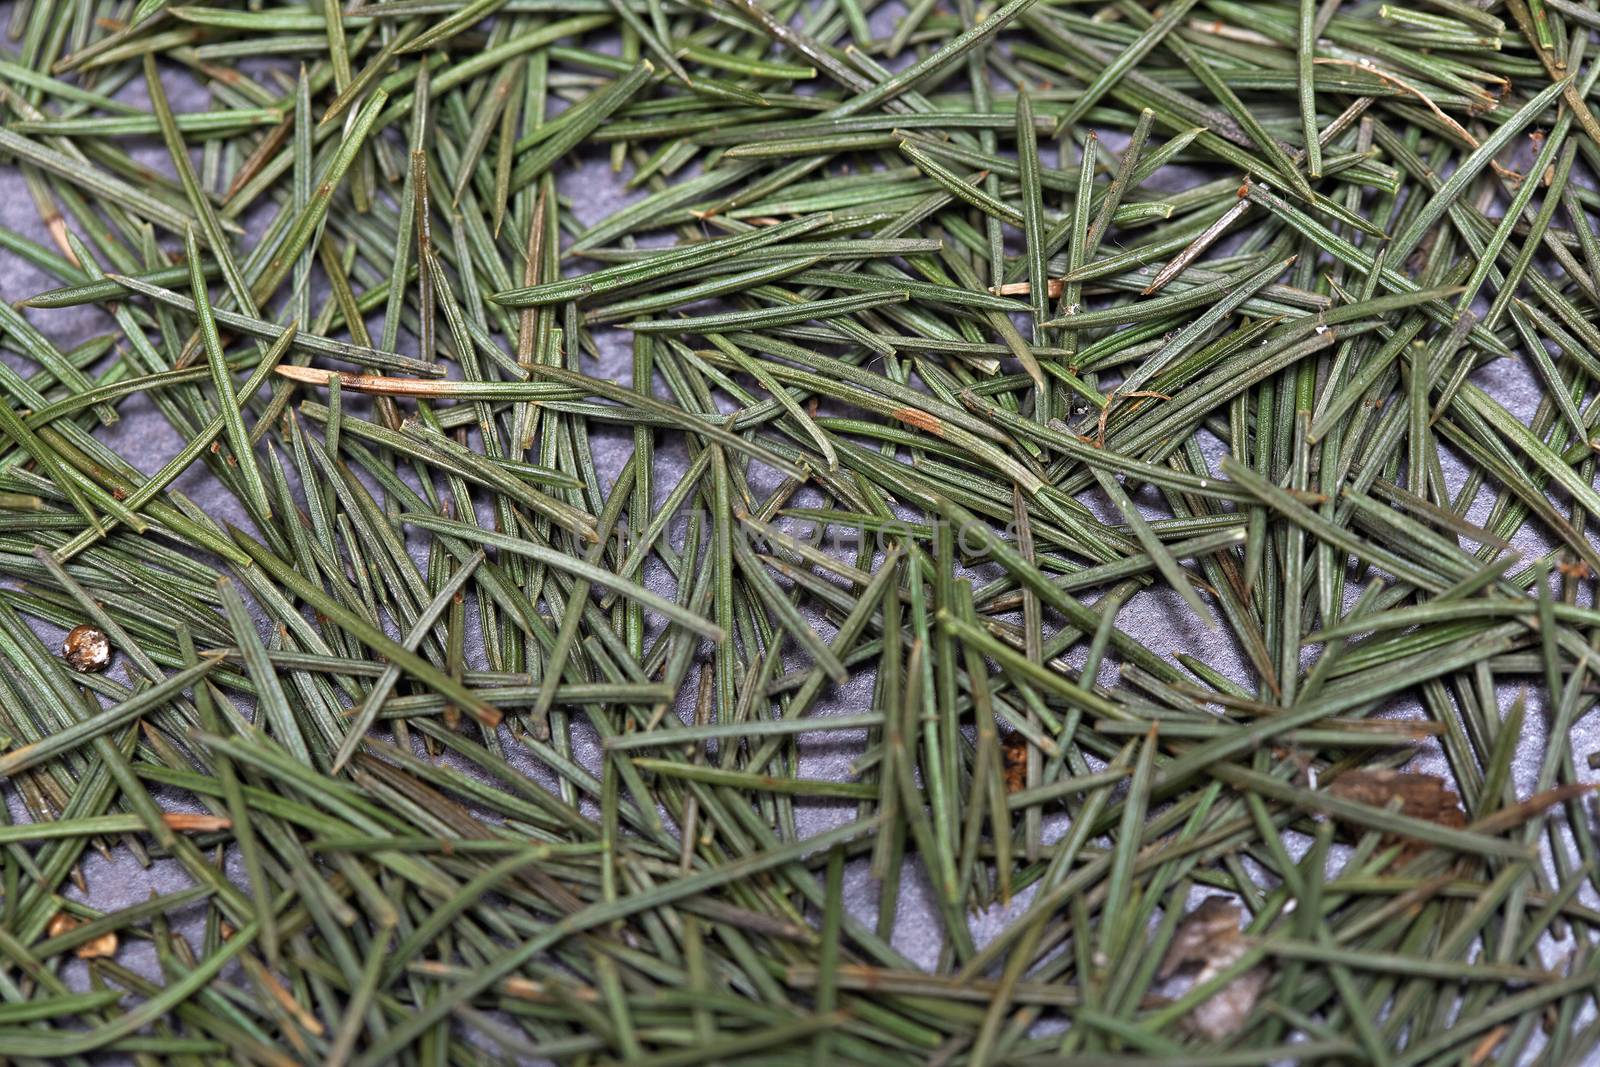 Full frame photo of spruce niddles. Close-up view